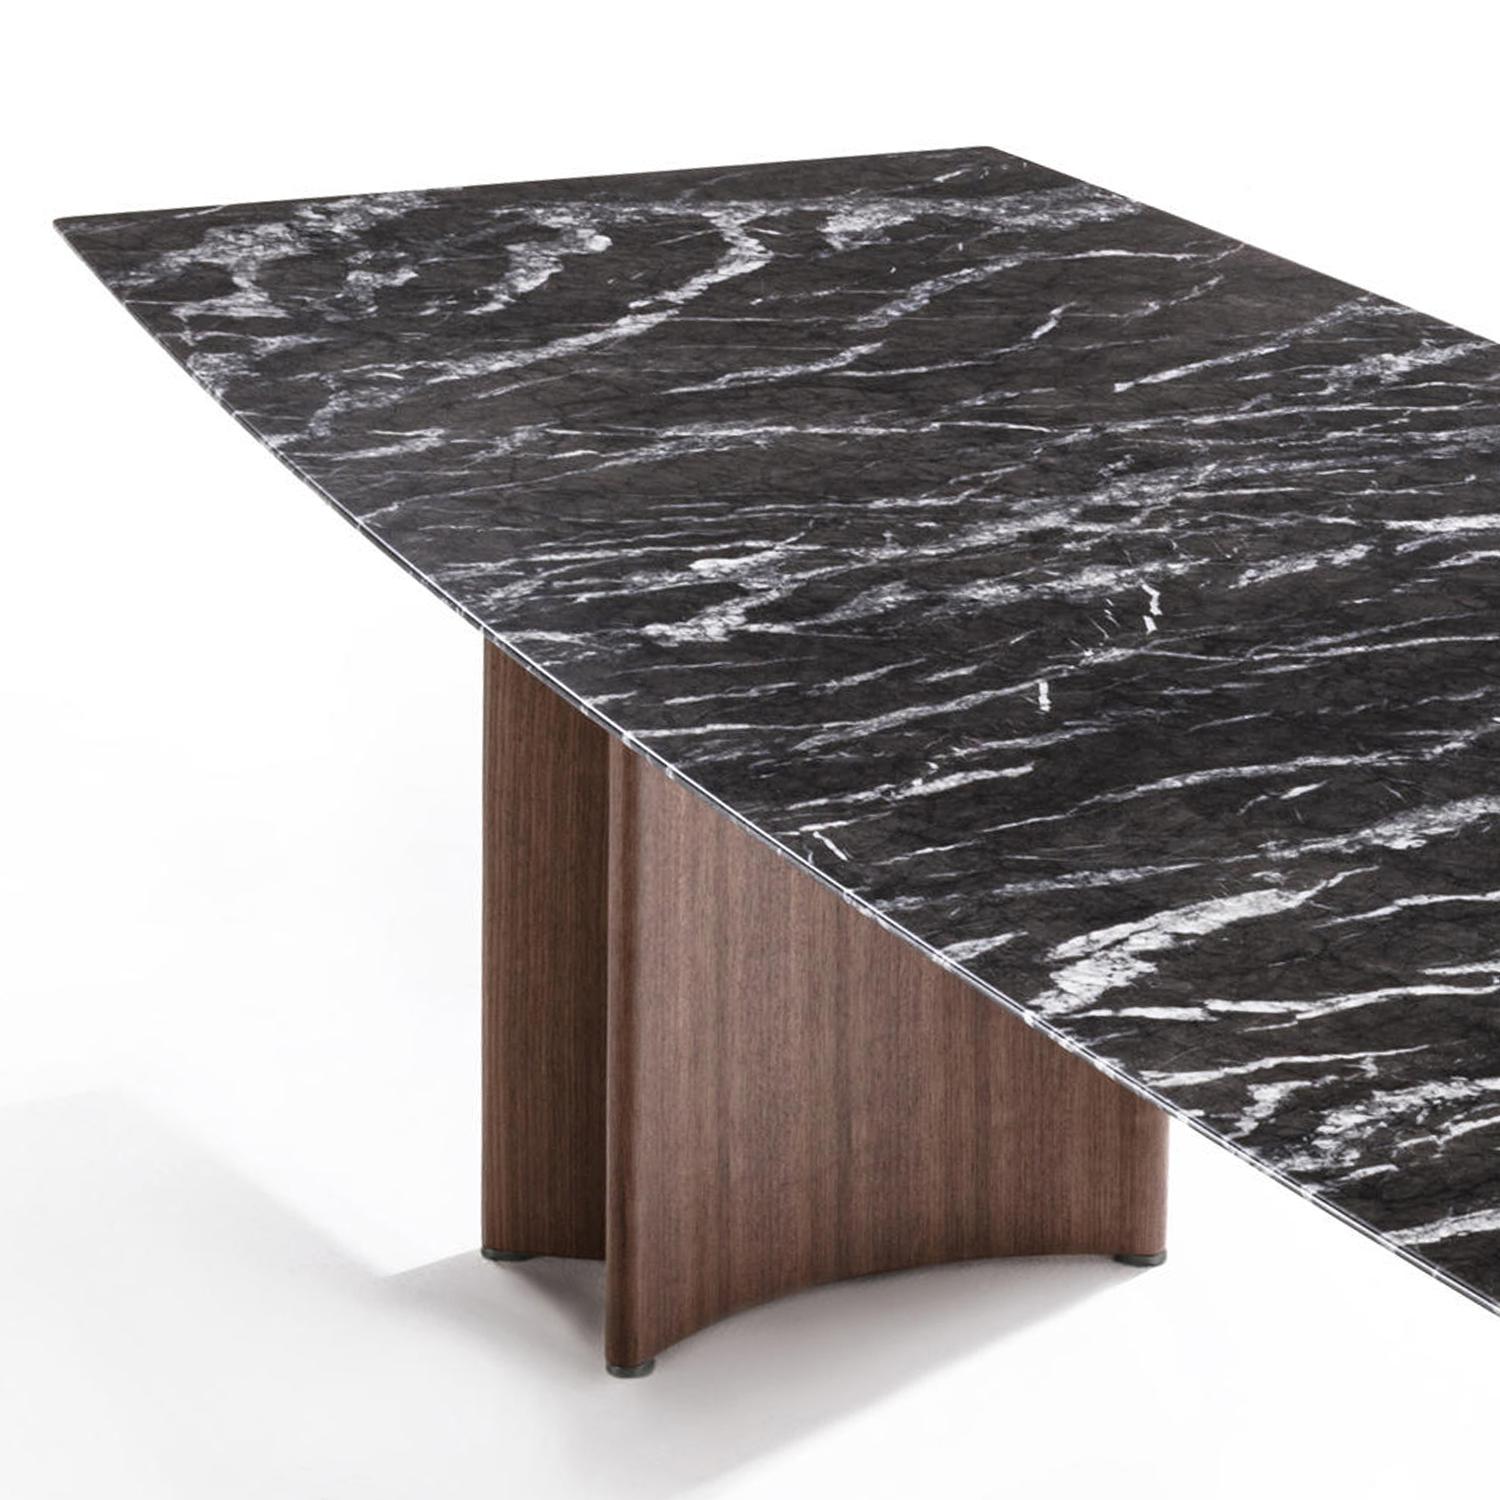 Dining table around marble with 2 curved solid 
walnut bases each sides with metal end-feet. With 
curved shaped polished dark grey marble top (20mm thickness).
Marble top with bevelled outline edge.
Also available on request with calacatta